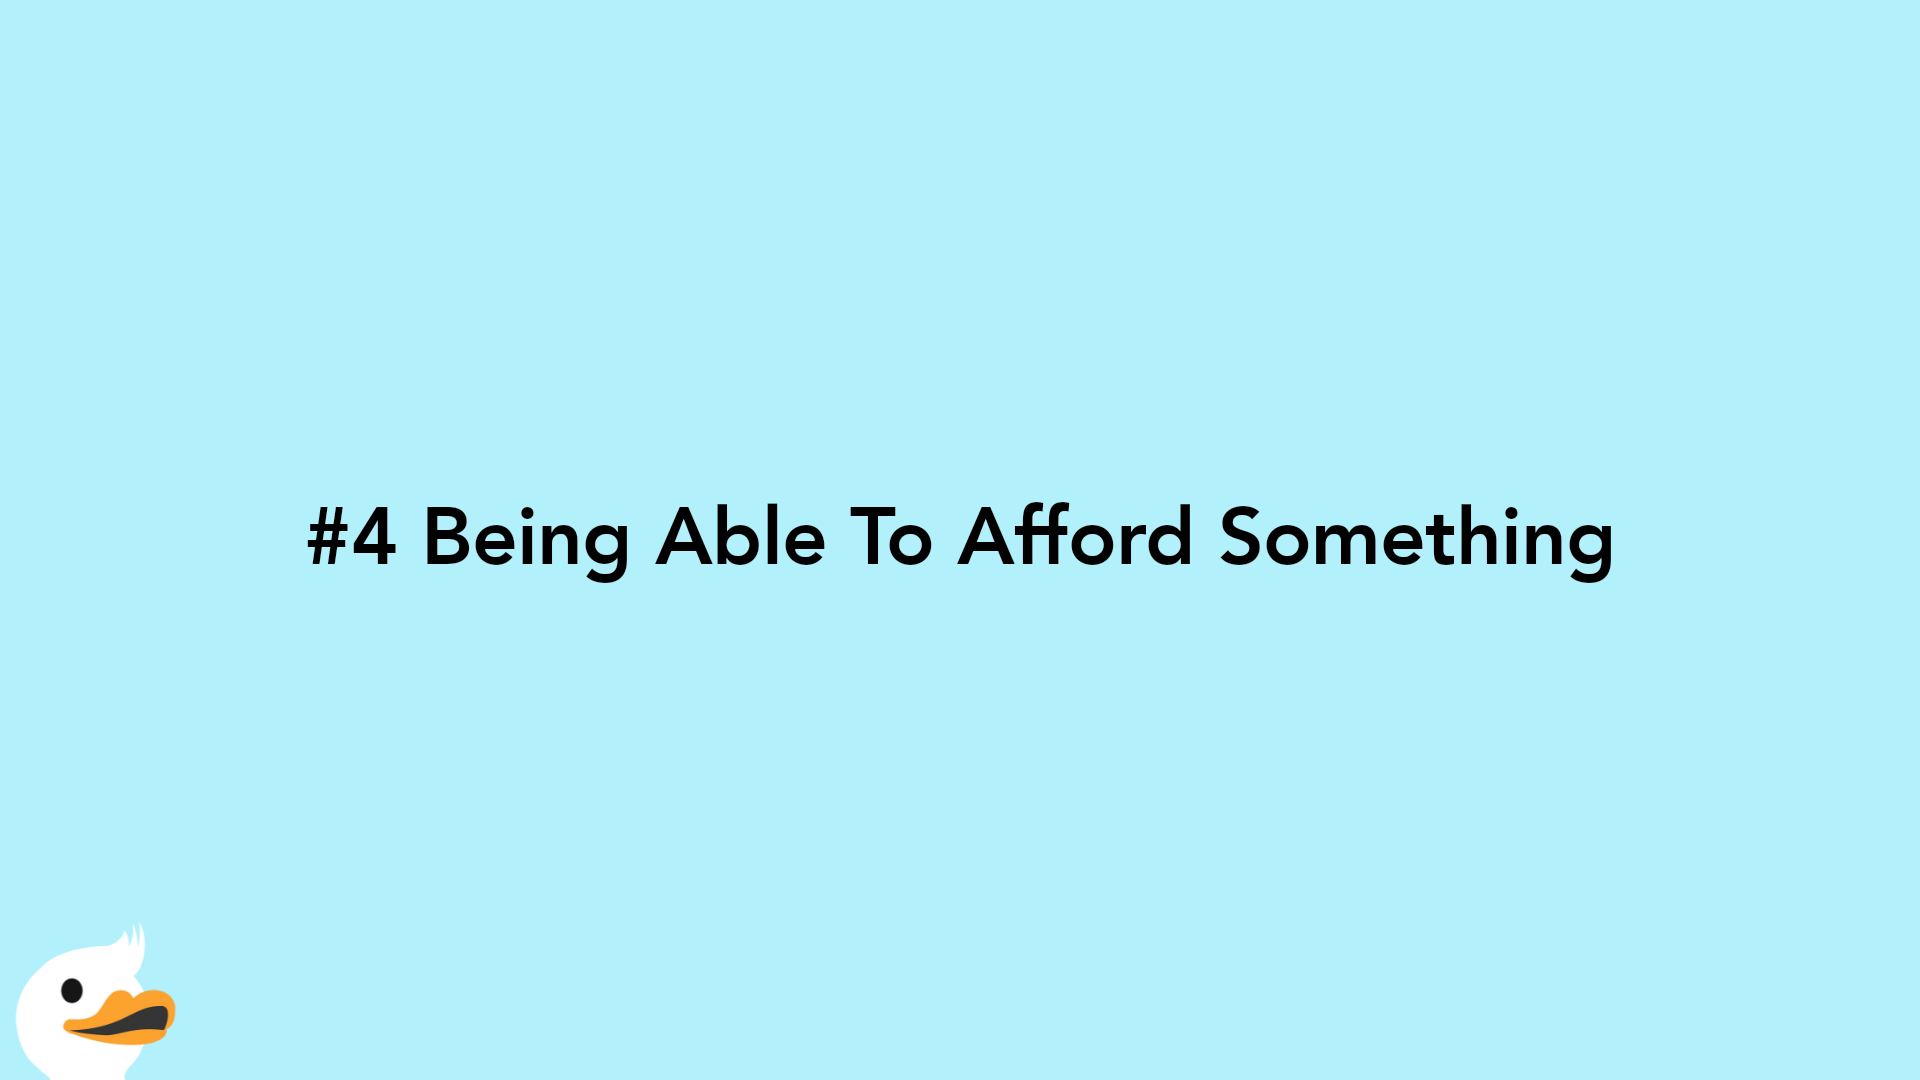 #4 Being Able To Afford Something